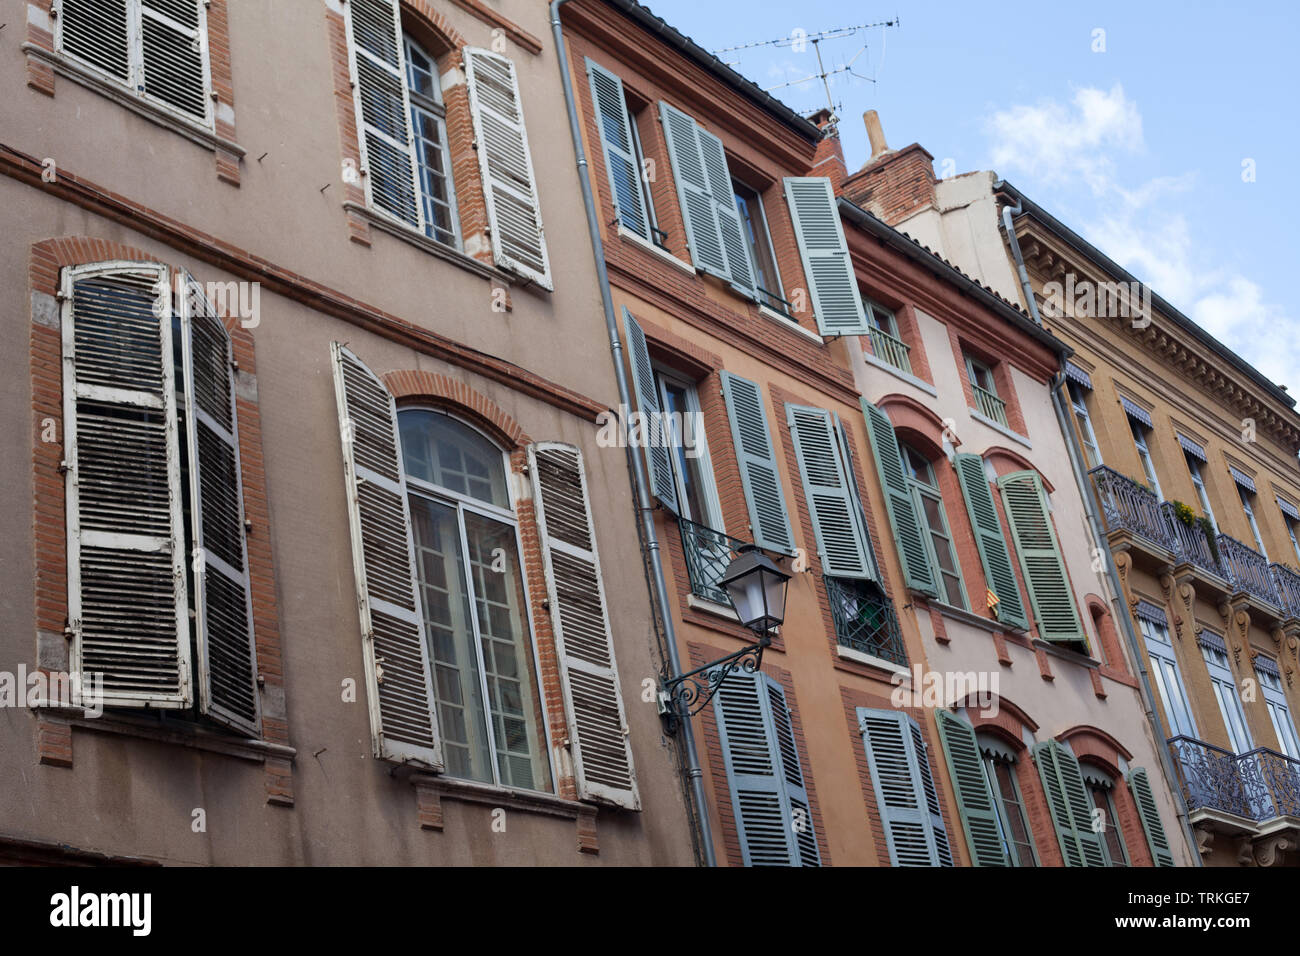 Typical French houses with old wooden shutters, Rue du Taur, Toulouse, Haute-Garonne Occitanie, France Stock Photo